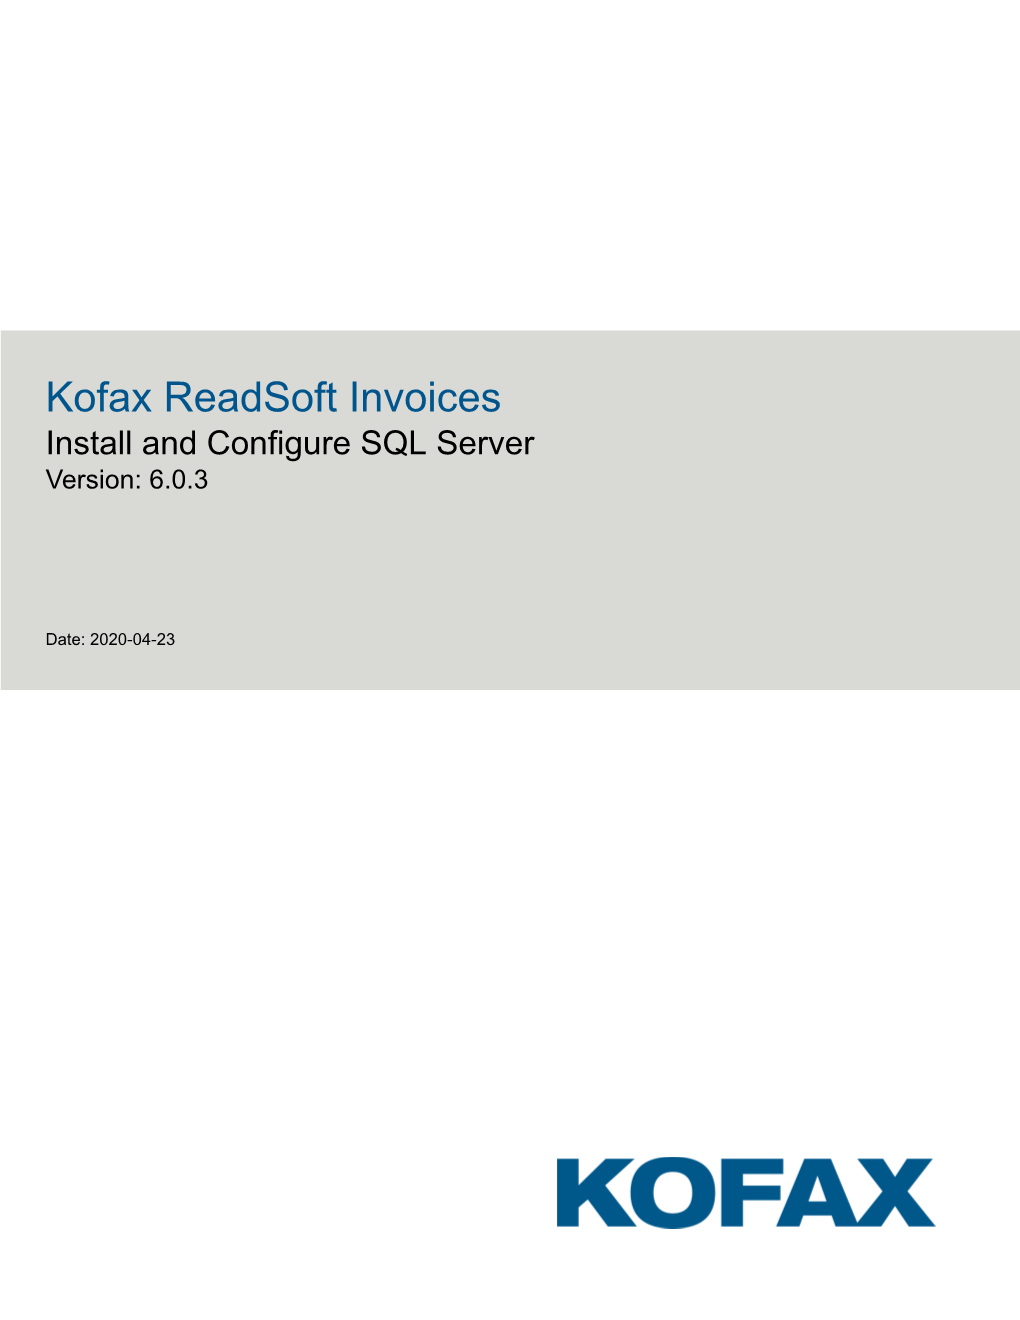 Kofax Readsoft Invoices Install and Configure SQL Server Version: 6.0.3